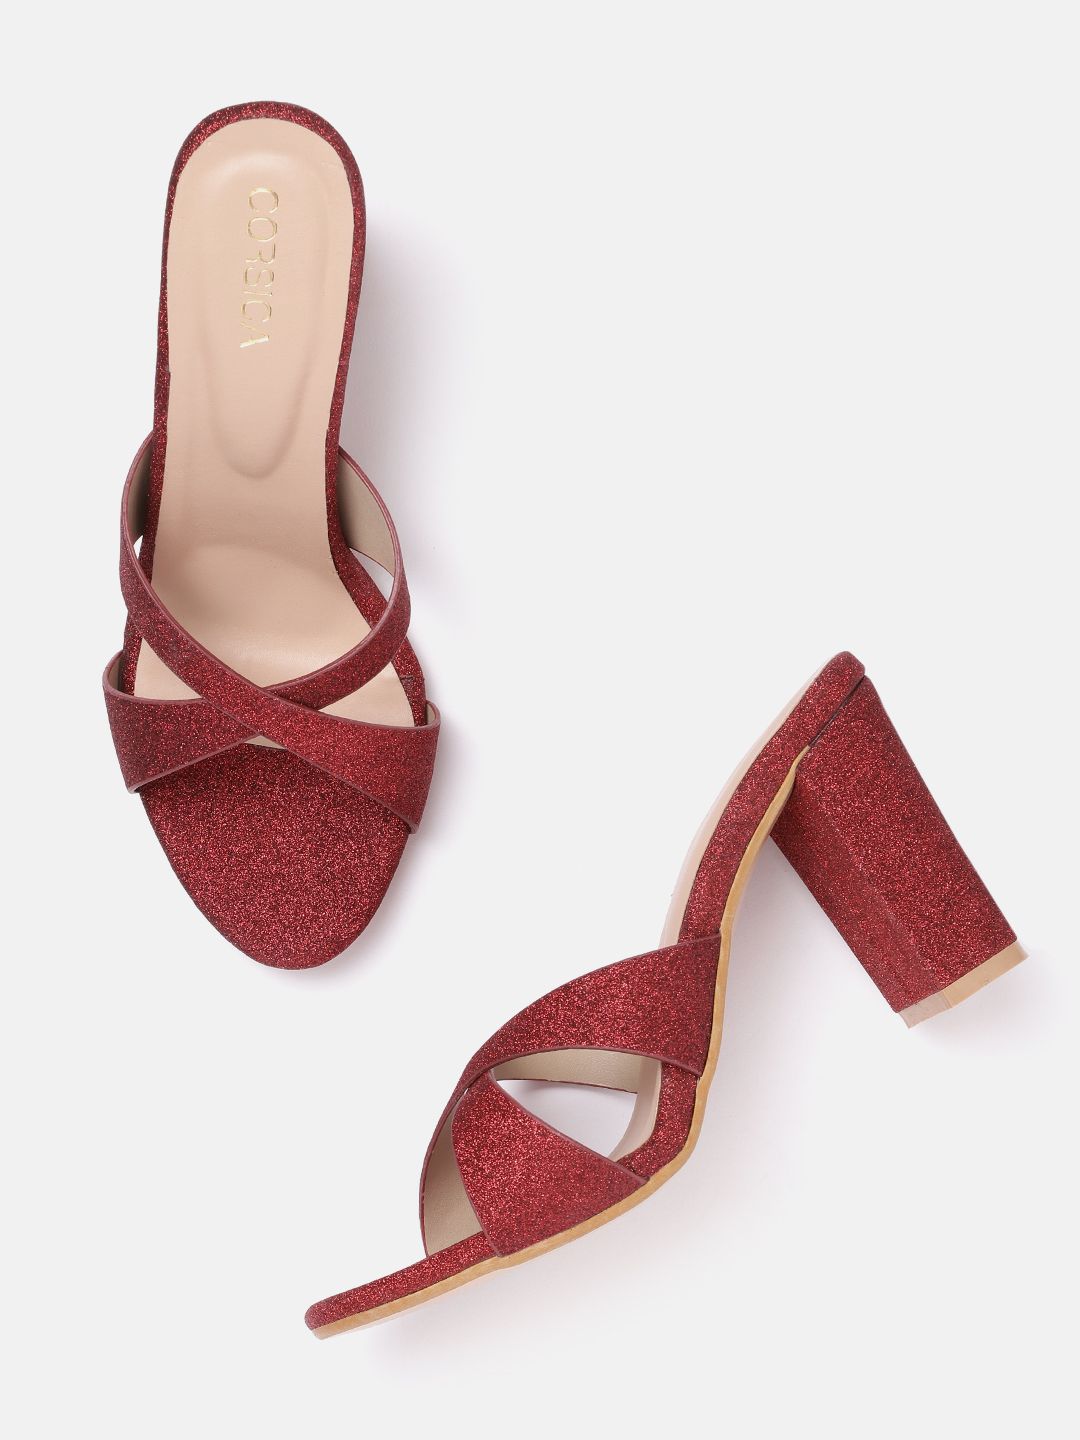 CORSICA Red Party Block Sandals Price in India